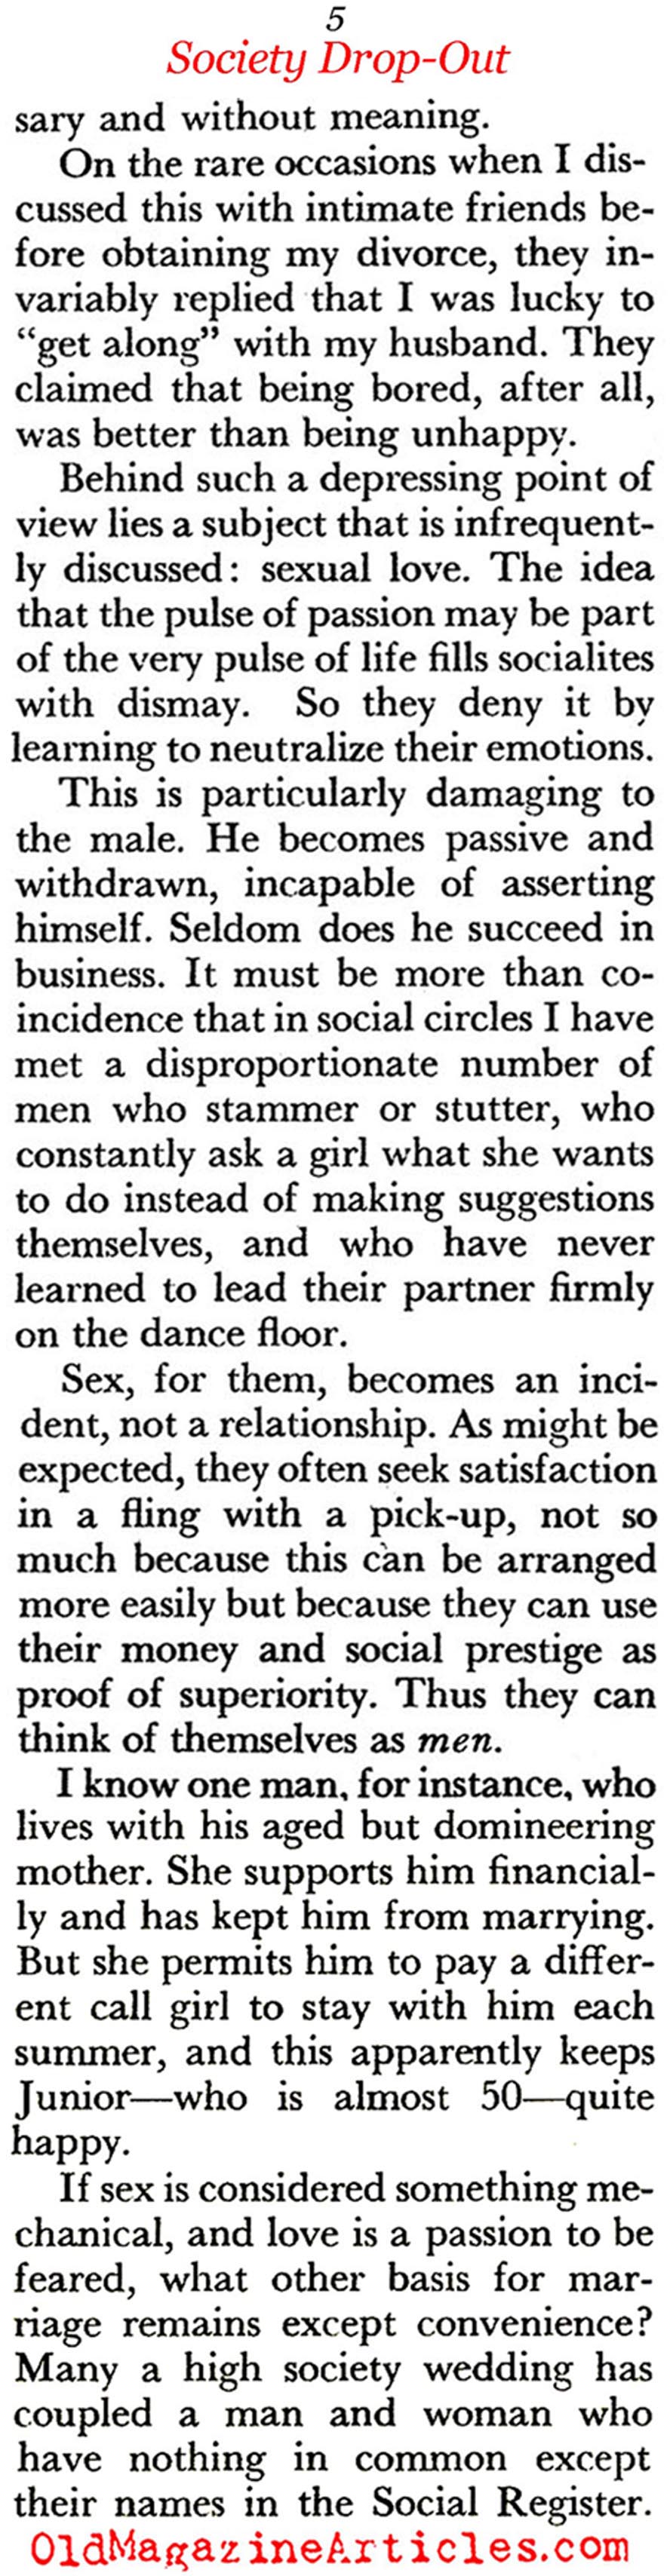 ''The Low State of High Society'' (Coronet Magazine, 1958)